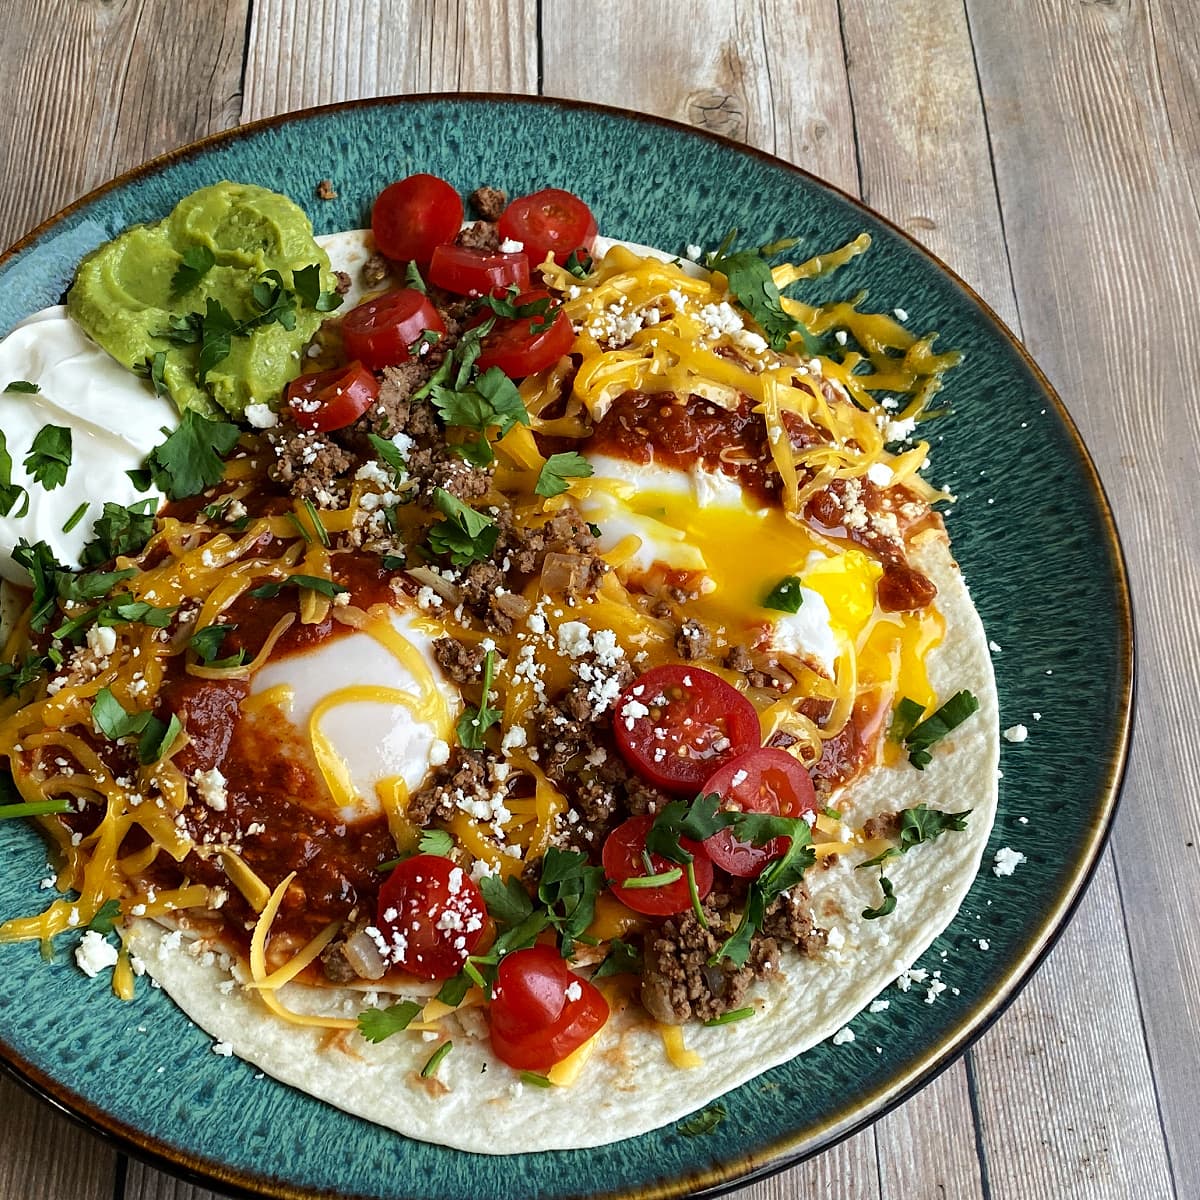 Huevos rancheros, plated and topped with cheese, chorizo, beans, chopped cilantro.